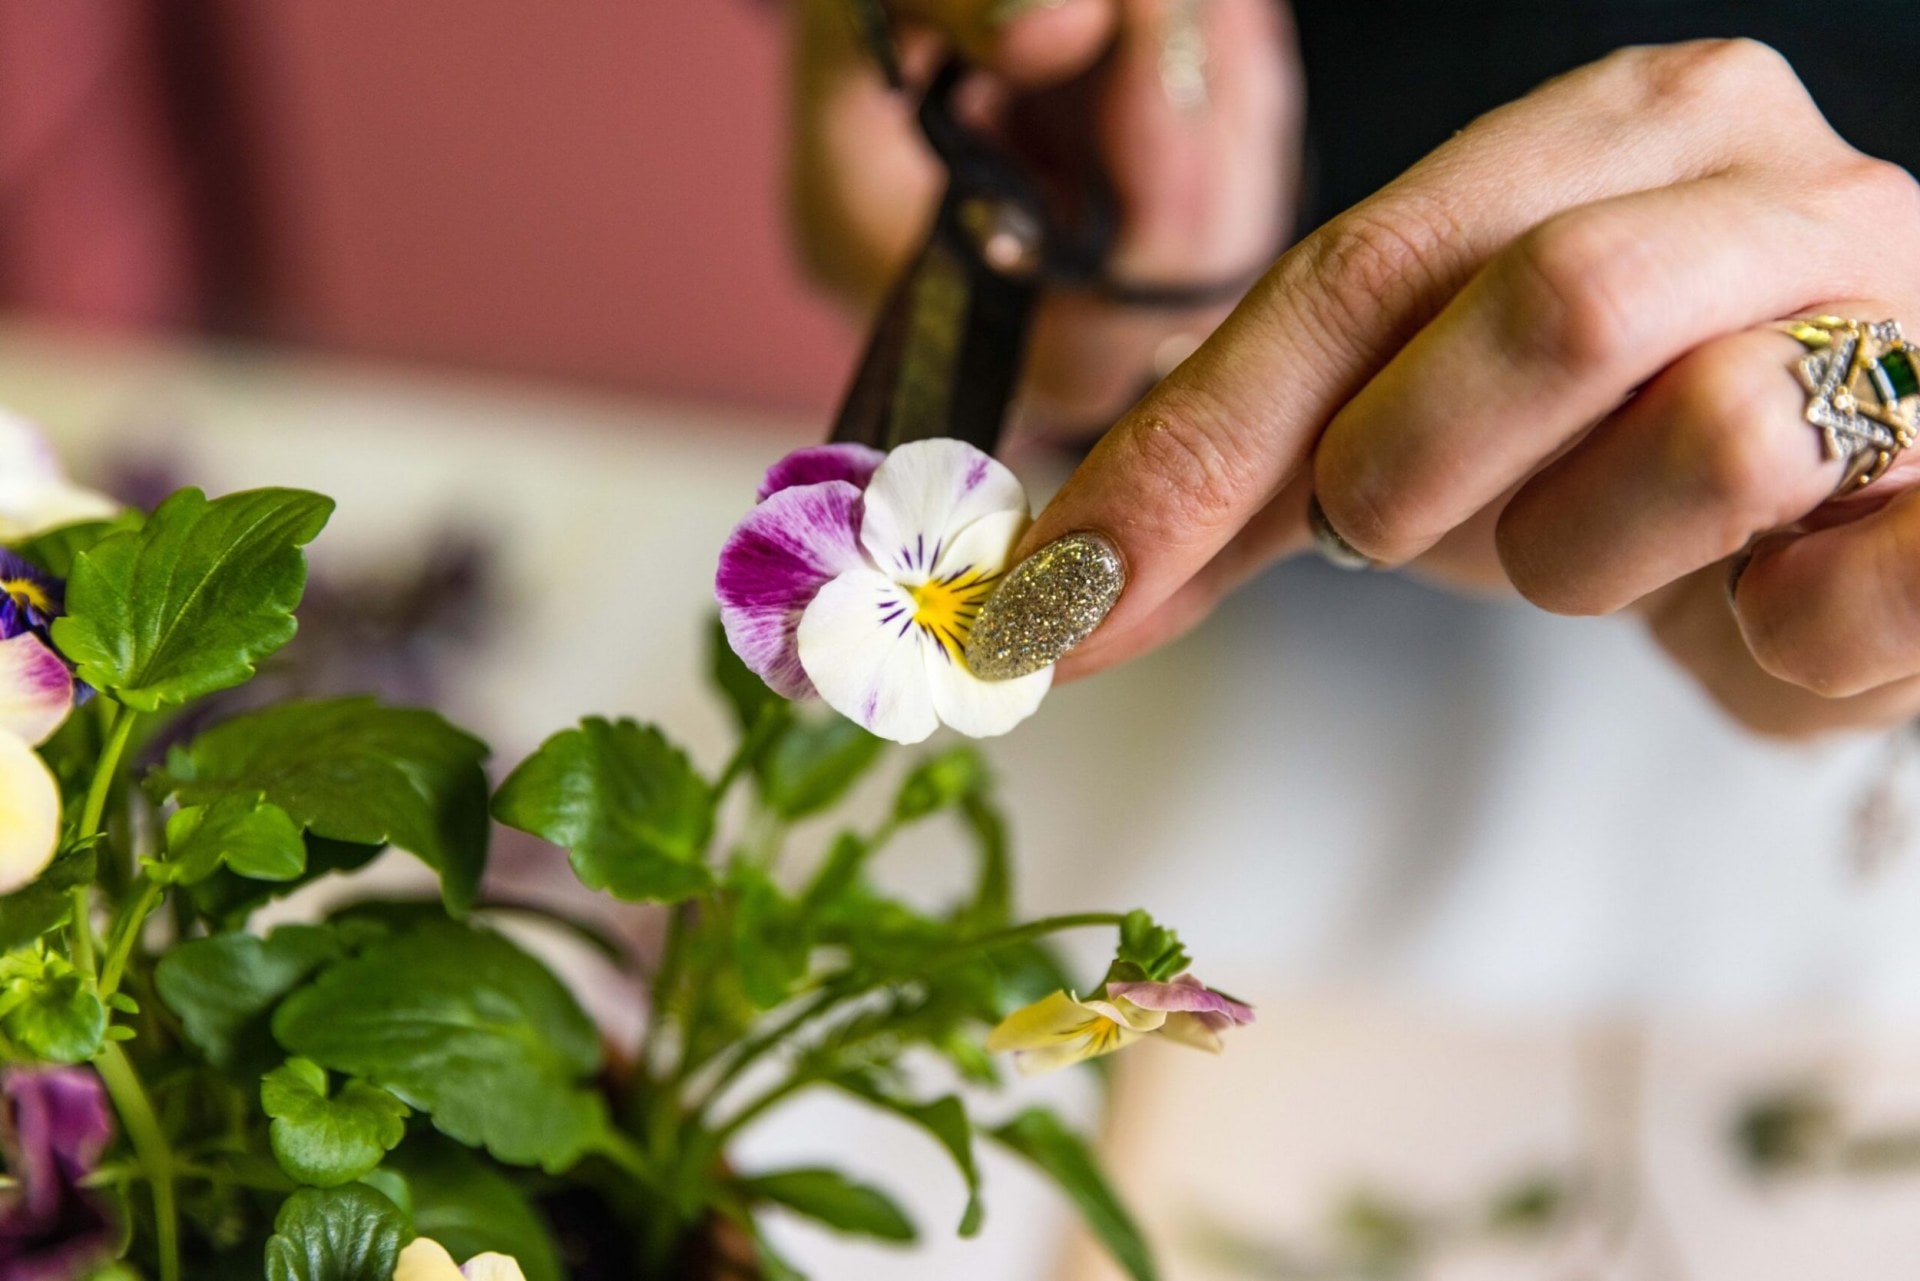 A purple and white pansy flower blossom being cut from its stem with scissors